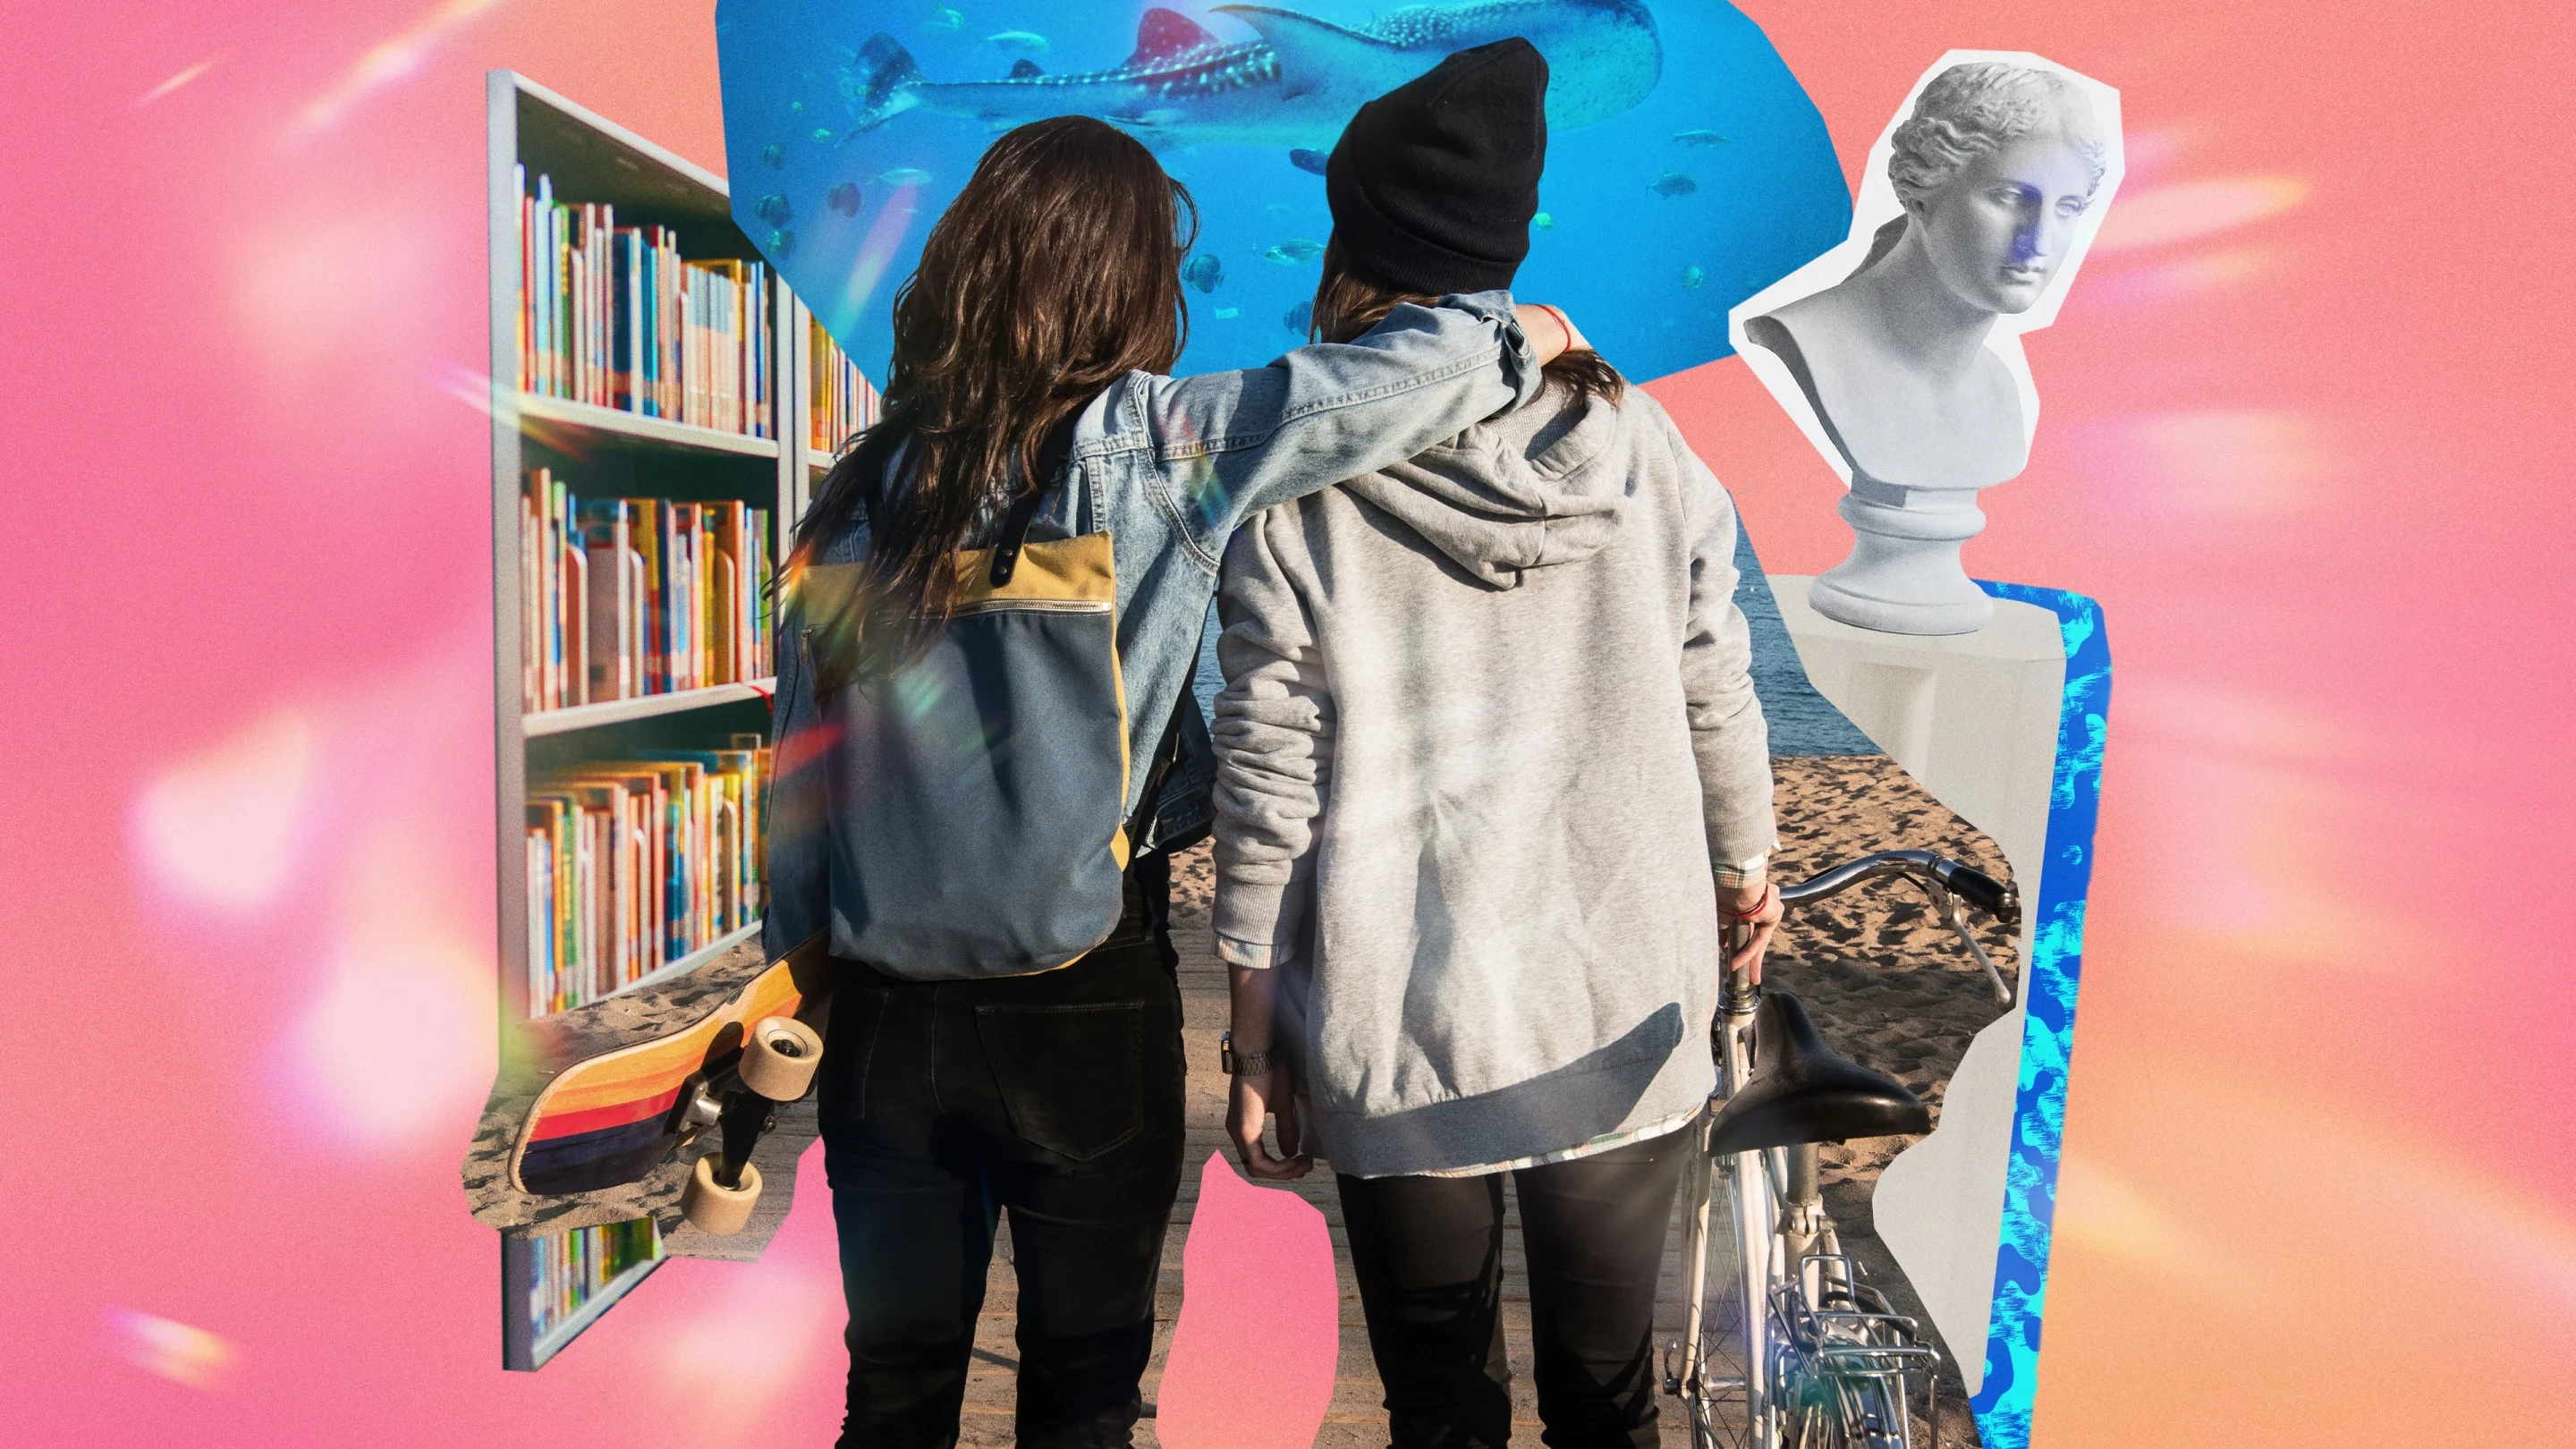 Two women with their arms around each other, with various items collaged around them including a deconstructed bookshelf,  a shark in an aquarium and an art bust.